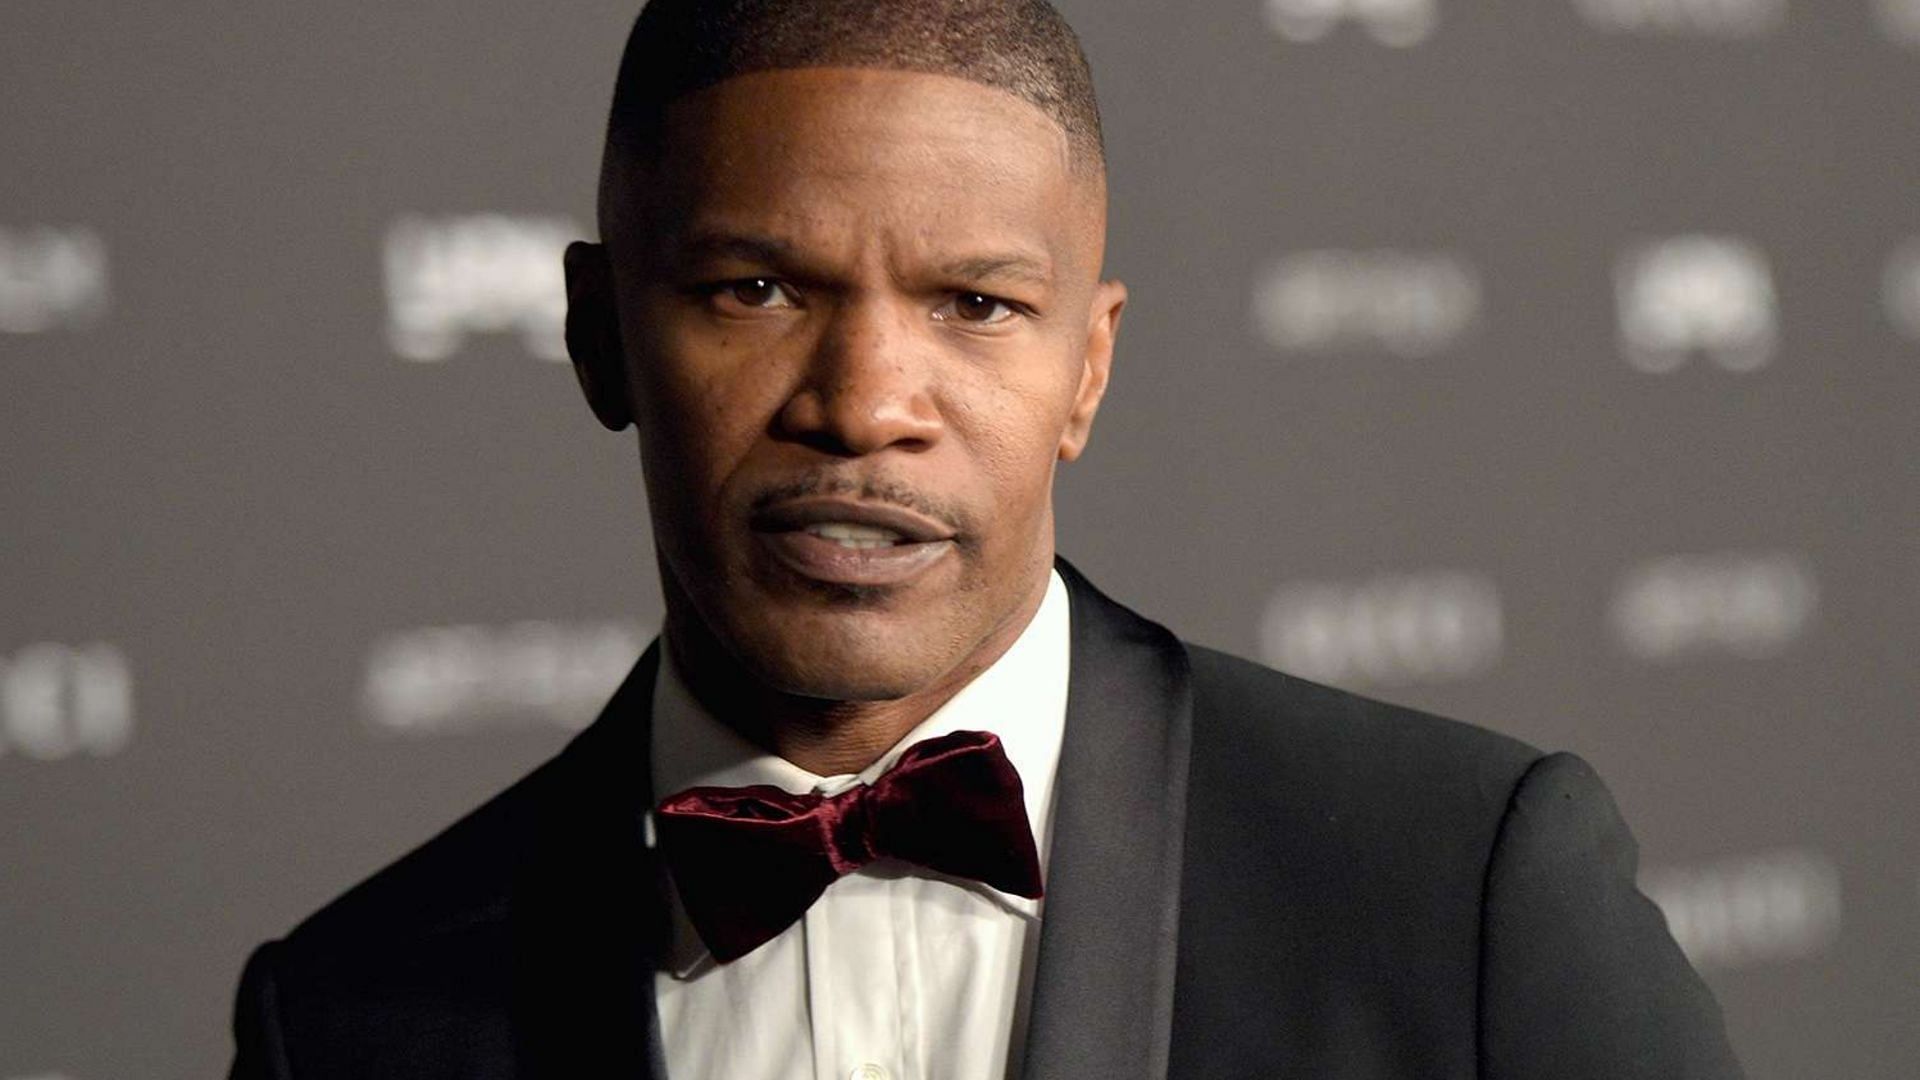 Jamie Foxx is one of the most accomplished actors of this generation.